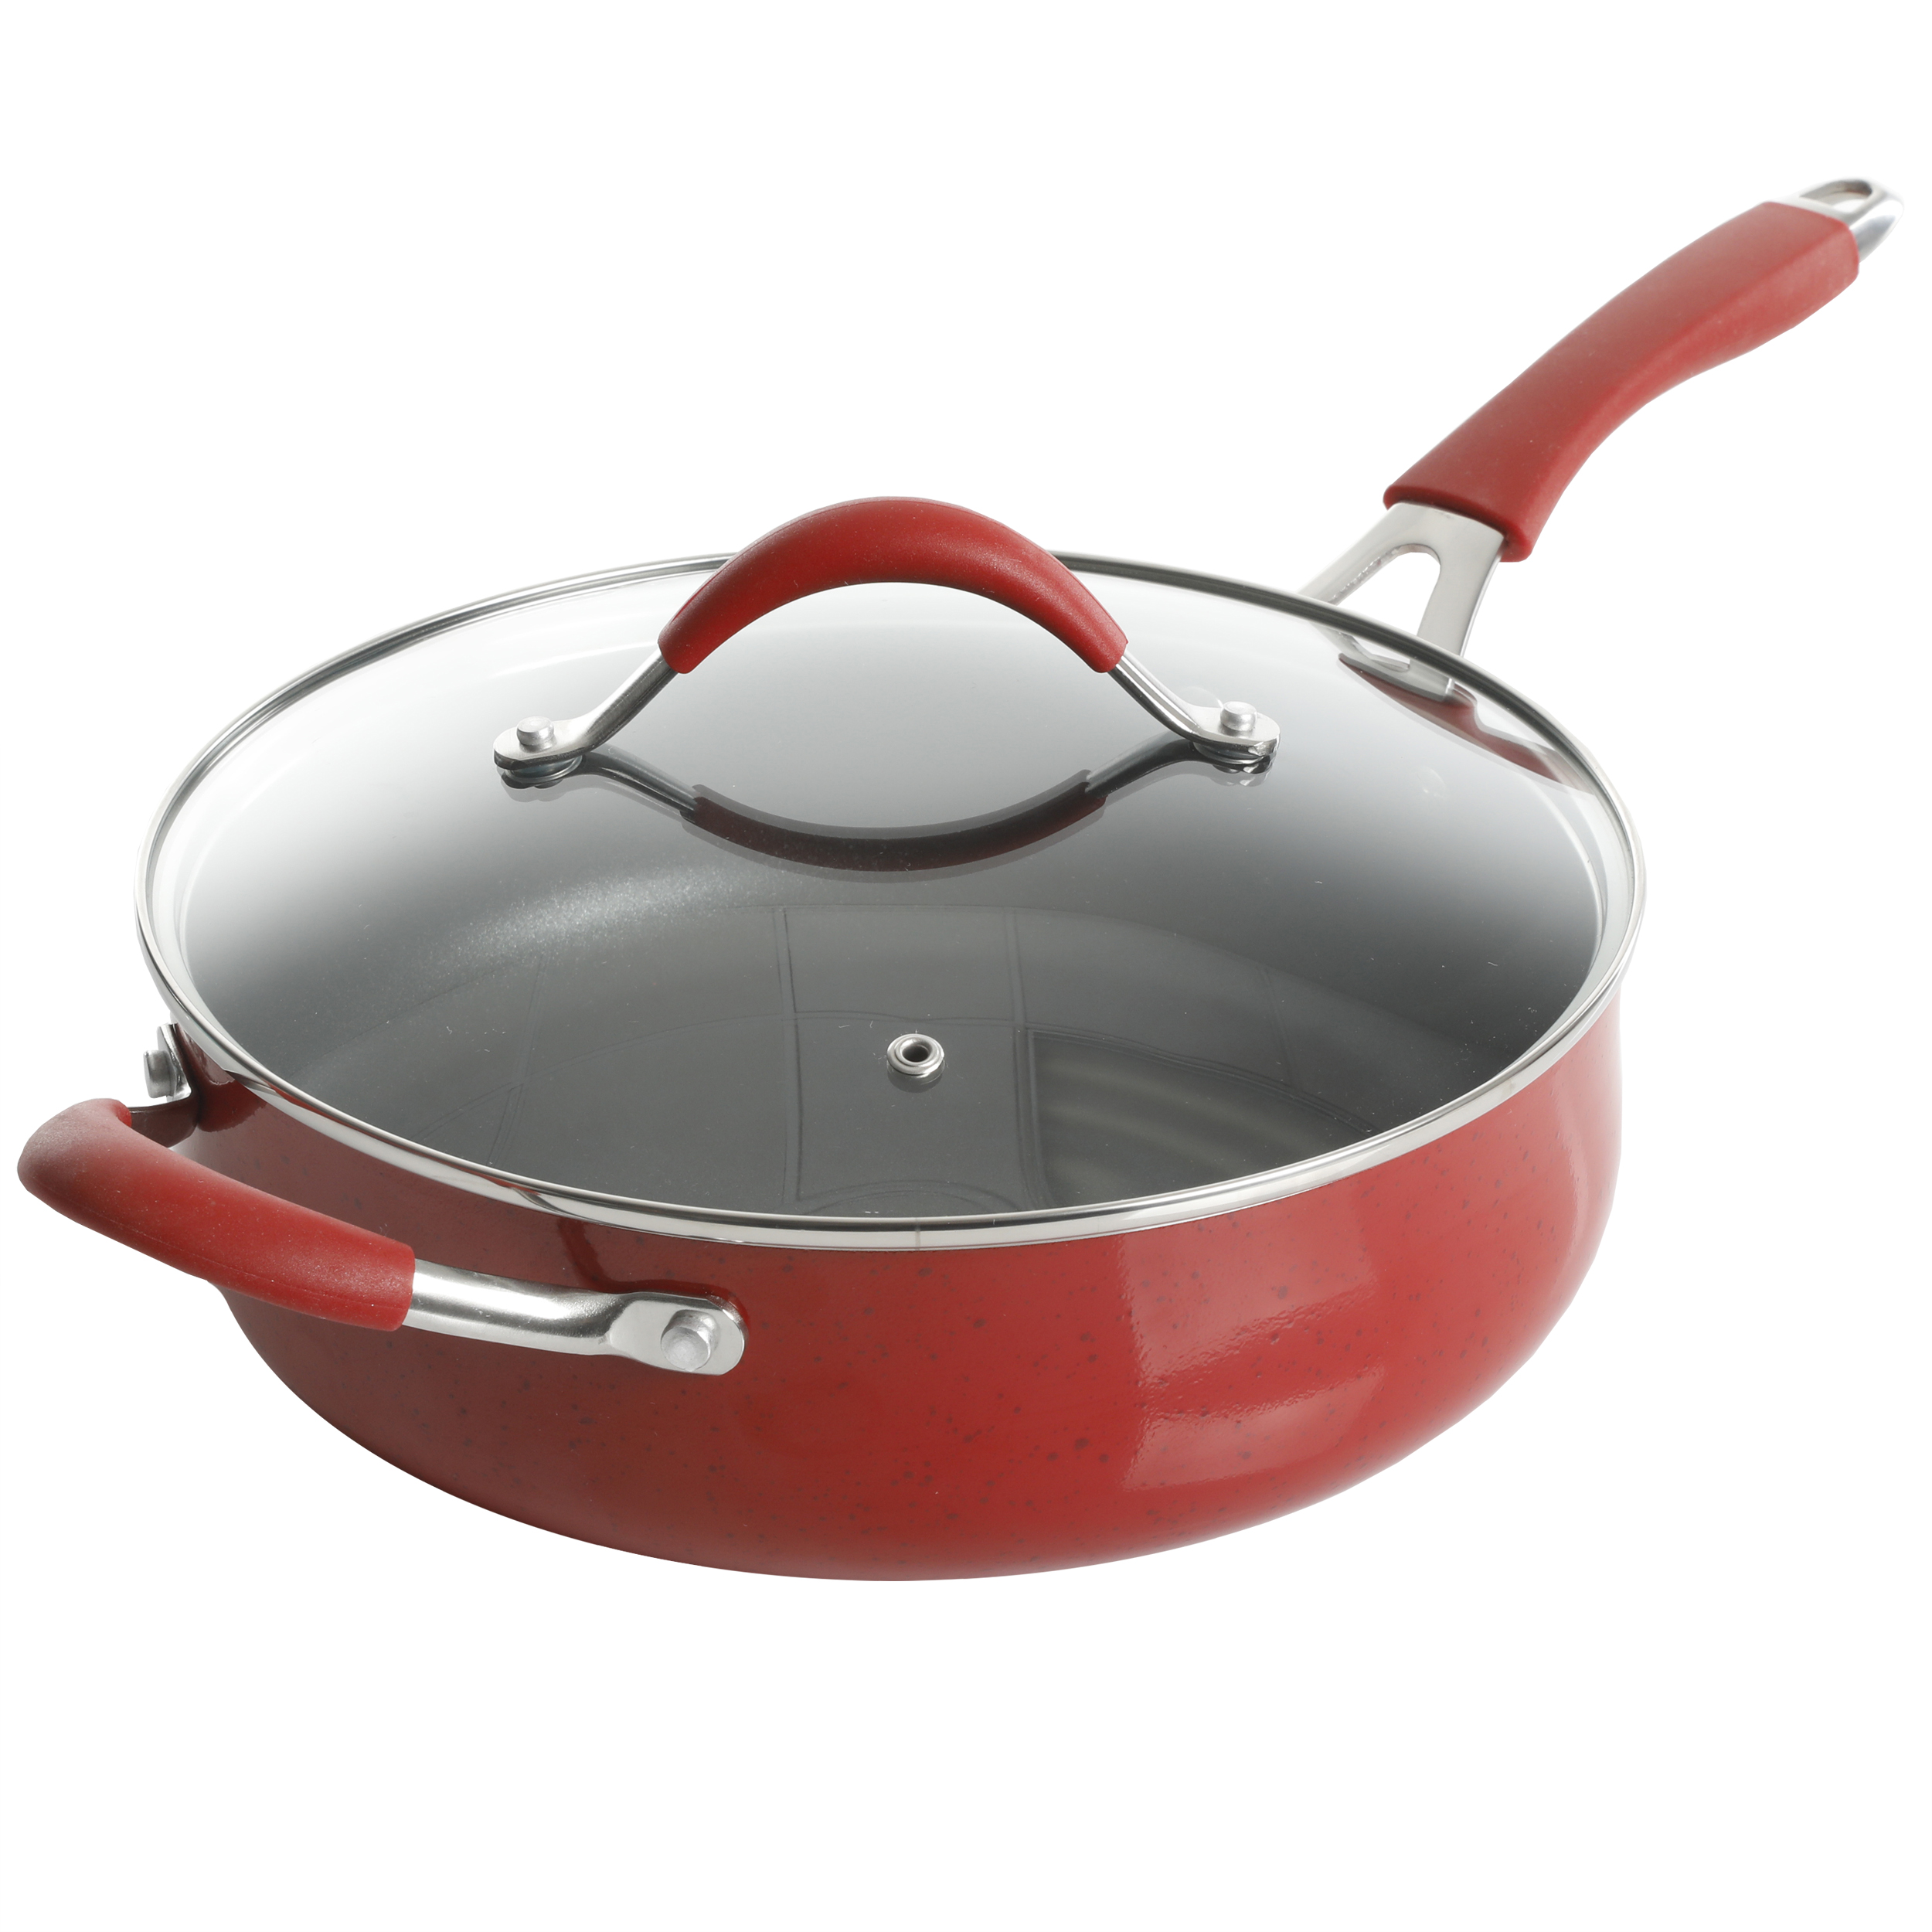 The Pioneer Woman Frontier 5-Piece Non-Stick Aluminum Cookware Set, Red - image 3 of 7